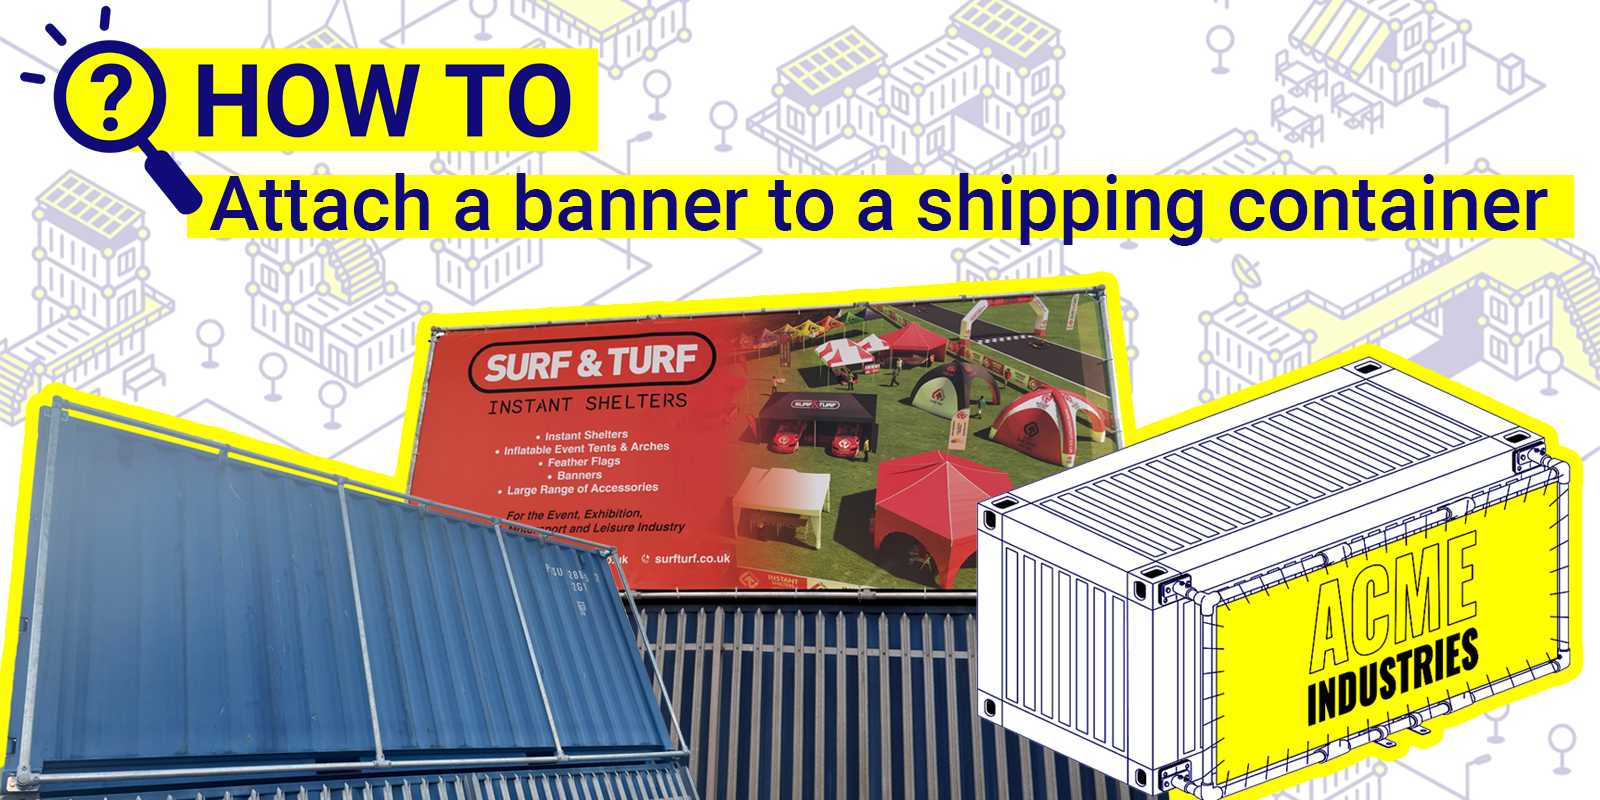 How to attach a banner to a shipping container